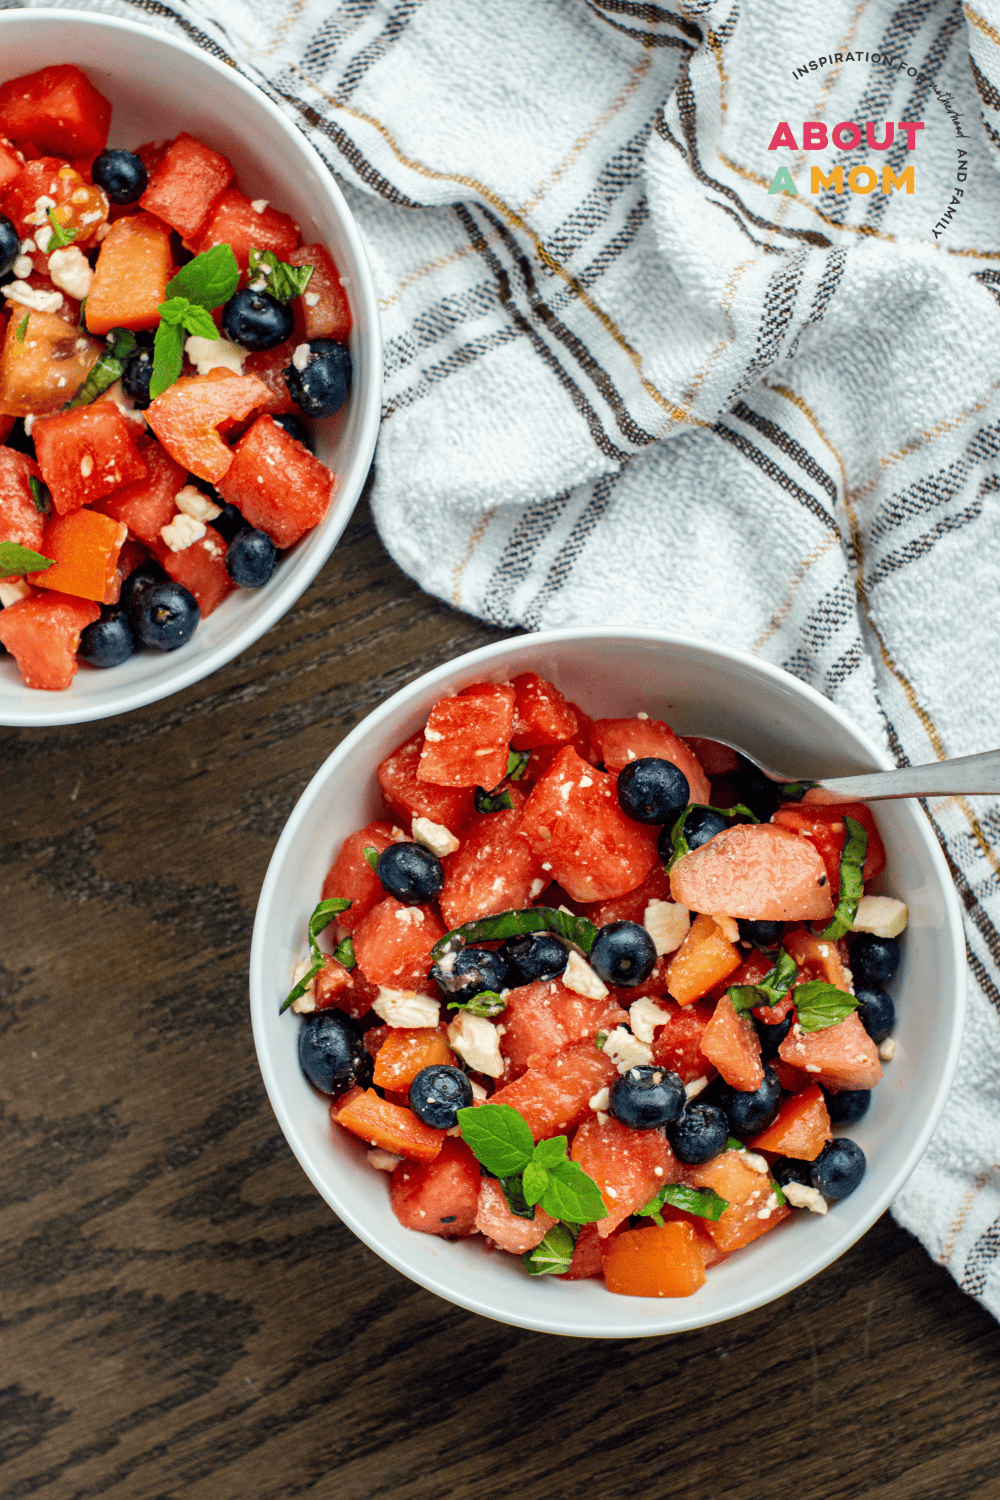 Tomato Watermelon & Blueberry Salad is done